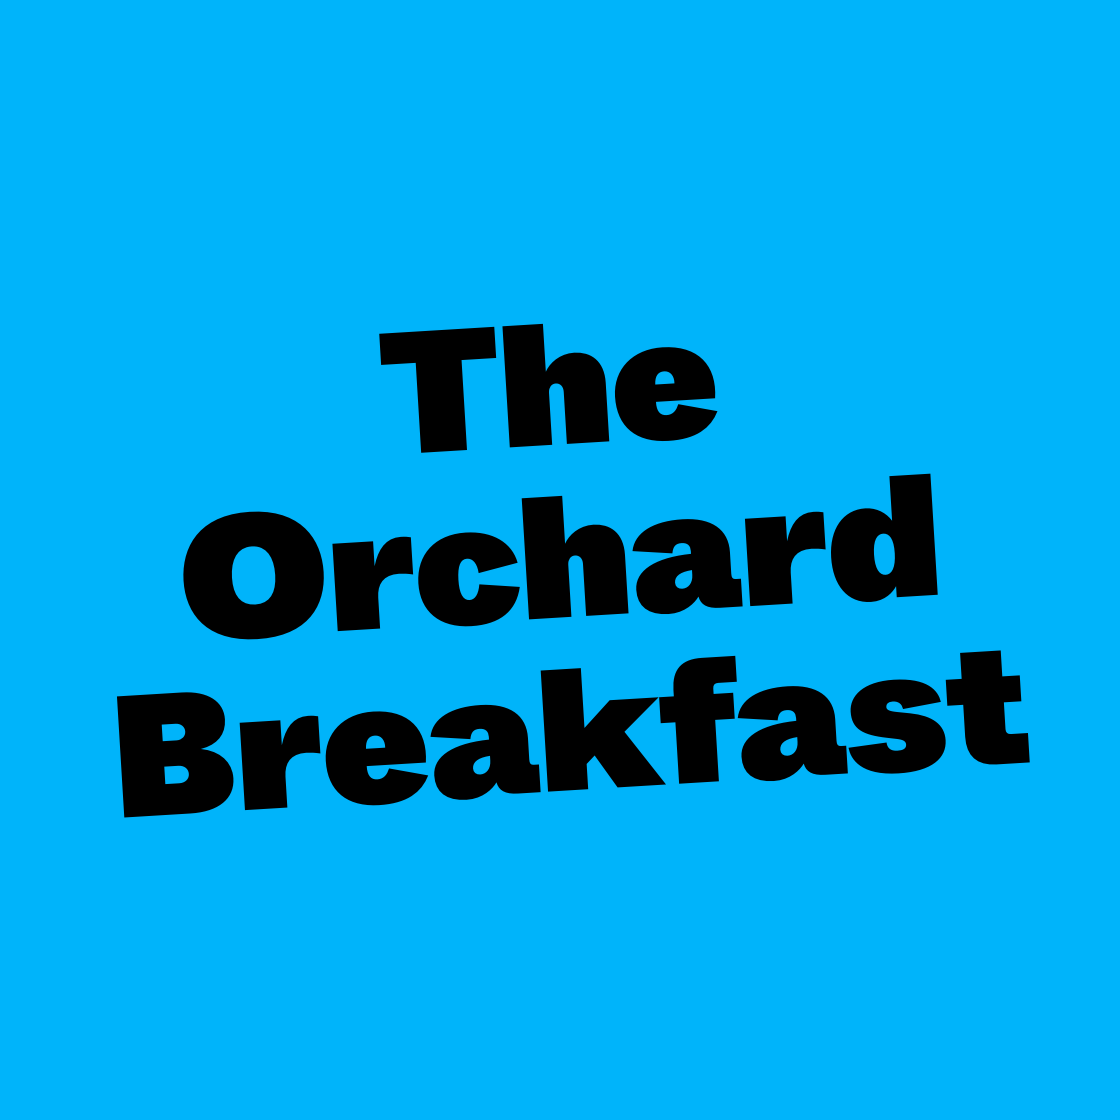 The Orchard Breakfast